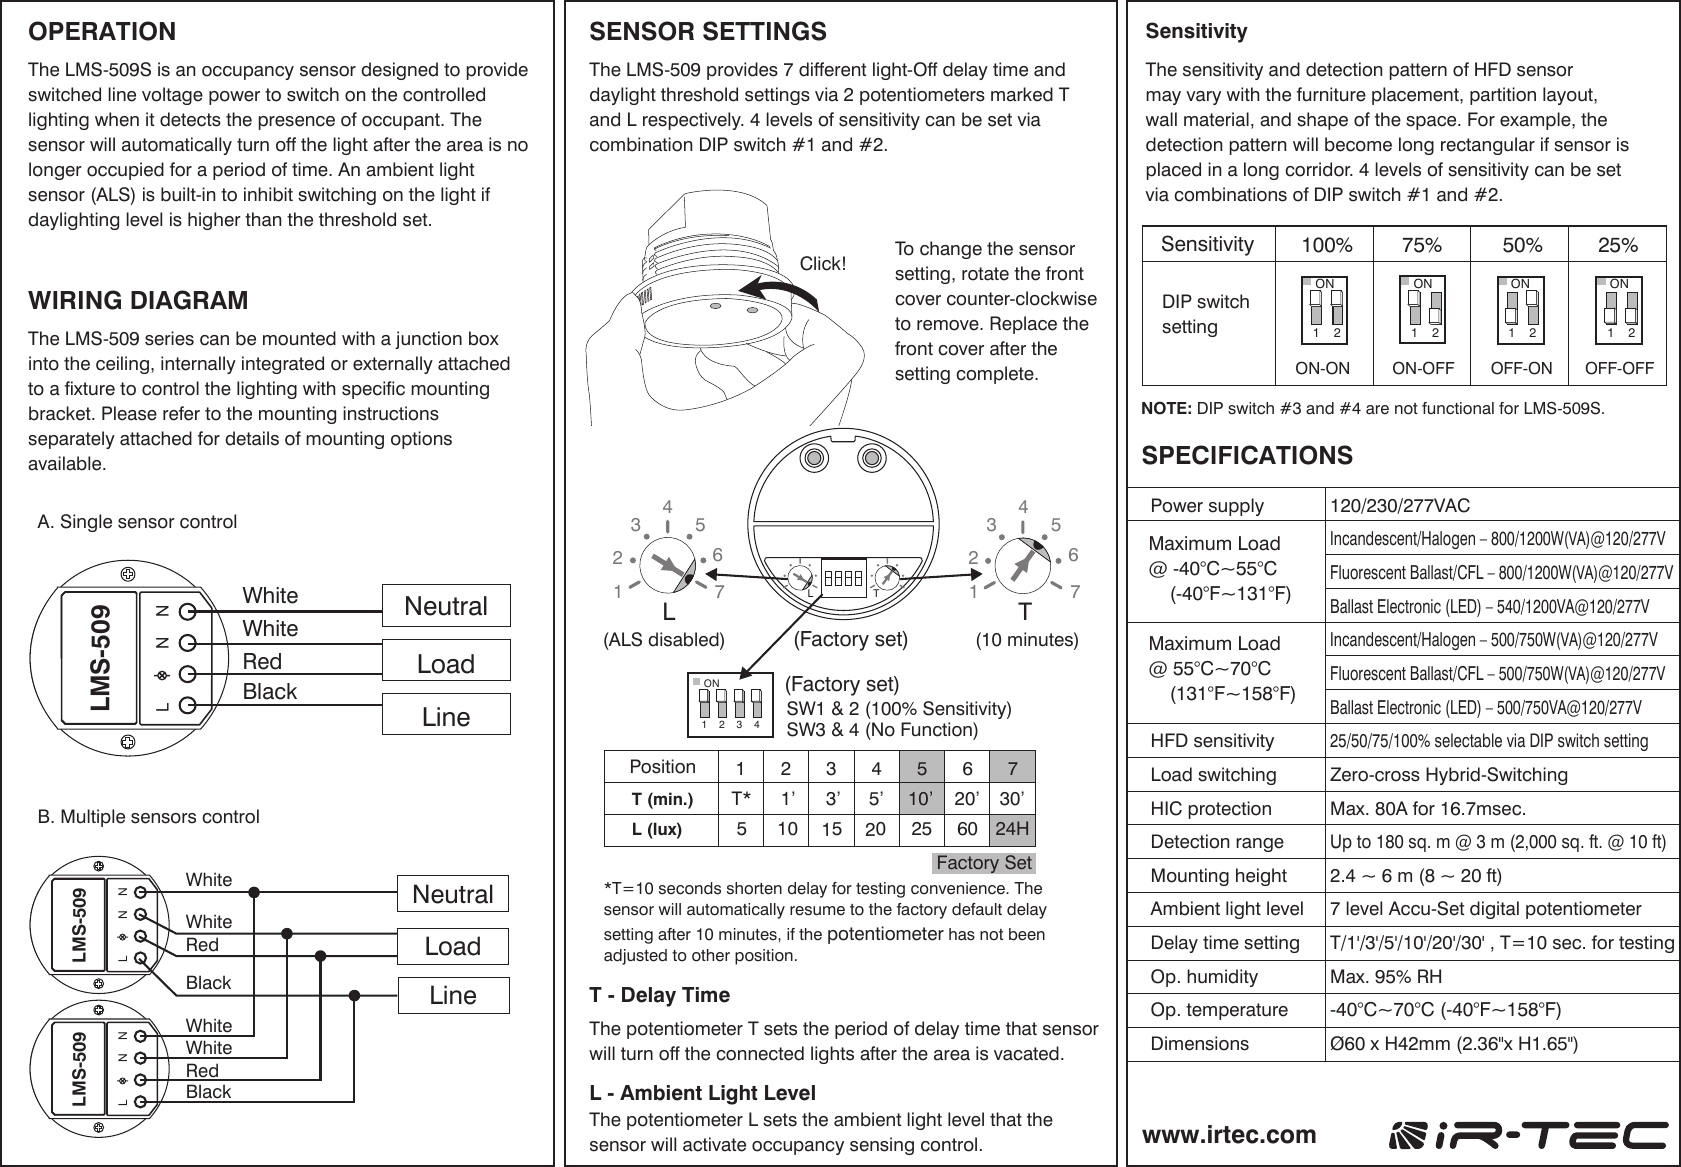 WIRING DIAGRAMSPECIFICATIONS www.irtec.comThe potentiometer T sets the period of delay time that sensor will turn off the connected lights after the area is vacated. The LMS-509 series can be mounted with a junction box into the ceiling, internally integrated or externally attached to a fixture to control the lighting with specific mounting bracket. Please refer to the mounting instructions separately attached for details of mounting options available. The LMS-509S is an occupancy sensor designed to provide switched line voltage power to switch on the controlled lighting when it detects the presence of occupant. The sensor will automatically turn off the light after the area is no longer occupied for a period of time. An ambient light sensor (ALS) is built-in to inhibit switching on the light if daylighting level is higher than the threshold set. T - Delay TimeThe potentiometer L sets the ambient light level that the sensor will activate occupancy sensing control.*T=10 seconds shorten delay for testing convenience. The sensor will automatically resume to the factory default delay setting after 10 minutes, if the potentiometer has not been adjusted to other position.NOTE: DIP switch #3 and #4 are not functional for LMS-509S.L - Ambient Light Level The sensitivity and detection pattern of HFD sensor may vary with the furniture placement, partition layout, wall material, and shape of the space. For example, the detection pattern will become long rectangular if sensor is placed in a long corridor. 4 levels of sensitivity can be set via combinations of DIP switch #1 and #2.SensitivityOPERATIONThe LMS-509 provides 7 different light-Off delay time and daylight threshold settings via 2 potentiometers marked T  and L respectively. 4 levels of sensitivity can be set via combination DIP switch #1 and #2.   To change the sensor setting, rotate the front cover counter-clockwise to remove. Replace the front cover after the setting complete.  SENSOR SETTINGS24HT* 1’ 3’ 5’ 10’ 20’ 30’T (min.)L (lux)11234567 1234567234567Position15 2051025 60  Power supplyHFD sensitivityLoad switchingHIC protectionDetection range Mounting heightAmbient light levelDelay time settingOp. humidityOp. temperatureDimensions120/230/277VACIncandescent/Halogen – 800/1200W(VA)@120/277VFluorescent Ballast/CFL – 800/1200W(VA)@120/277VBallast Electronic (LED) – 540/1200VA@120/277VIncandescent/Halogen – 500/750W(VA)@120/277VFluorescent Ballast/CFL – 500/750W(VA)@120/277VBallast Electronic (LED) – 500/750VA@120/277V25/50/75/100% selectable via DIP switch settingZero-cross Hybrid-SwitchingMax. 80A for 16.7msec.Up to 180 sq. m @ 3 m (2,000 sq. ft. @ 10 ft)2.4 ~ 6 m (8 ~ 20 ft)7 level Accu-Set digital potentiometerT/1&apos;/3&apos;/5&apos;/10&apos;/20&apos;/30&apos; , T=10 sec. for testingMax. 95% RH-40°C~70°C (-40°F~158°F)Ø60 x H42mm (2.36&quot;x H1.65&quot;)Maximum Load@ -40°C~55°C    (-40°F~131°F)Maximum Load@ 55°C~70°C    (131°F~158°F)Factory SetA. Single sensor controlB. Multiple sensors controlLMS-509NL NLoadLineNeutralWhiteWhiteRedBlackDIP switchsettingSensitivity 100%ON-ON ON-OFF OFF-ON OFF-OFFON1 275%ON1 250%ON1 225%ON1 2TLTL(Factory set) (10 minutes)(ALS disabled)(Factory set)SW1 &amp; 2 (100% Sensitivity)SW3 &amp; 4 (No Function)ON1 2 3 4Click!LMS-509NL NLMS-509NL NLineNeutralLoadWhiteWhiteRedBlackWhiteWhiteRedBlack